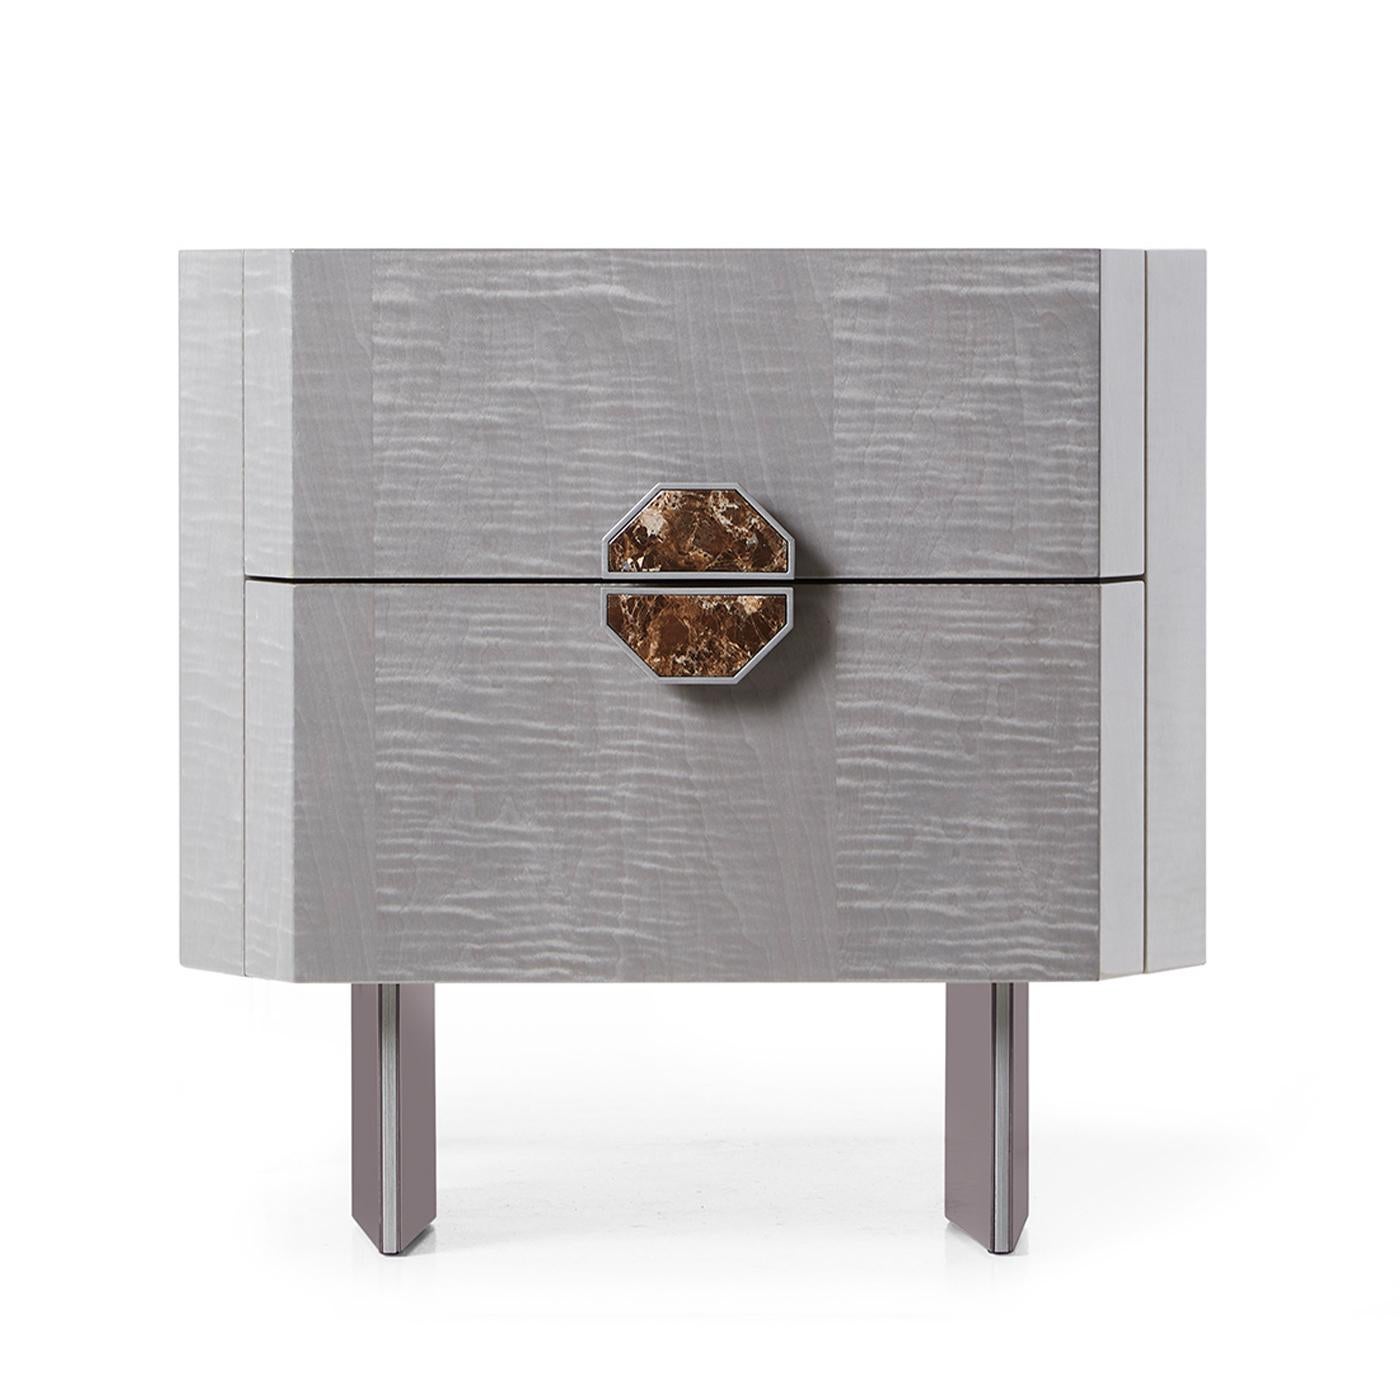 This elegant chest of 2 drawers has a wooden top, metal trims, and lacquered legs. The opening is facilitated by a precious Emperador Dark marble handle. Characterized by Lupo glossy finish, details are made of Nickel metal.